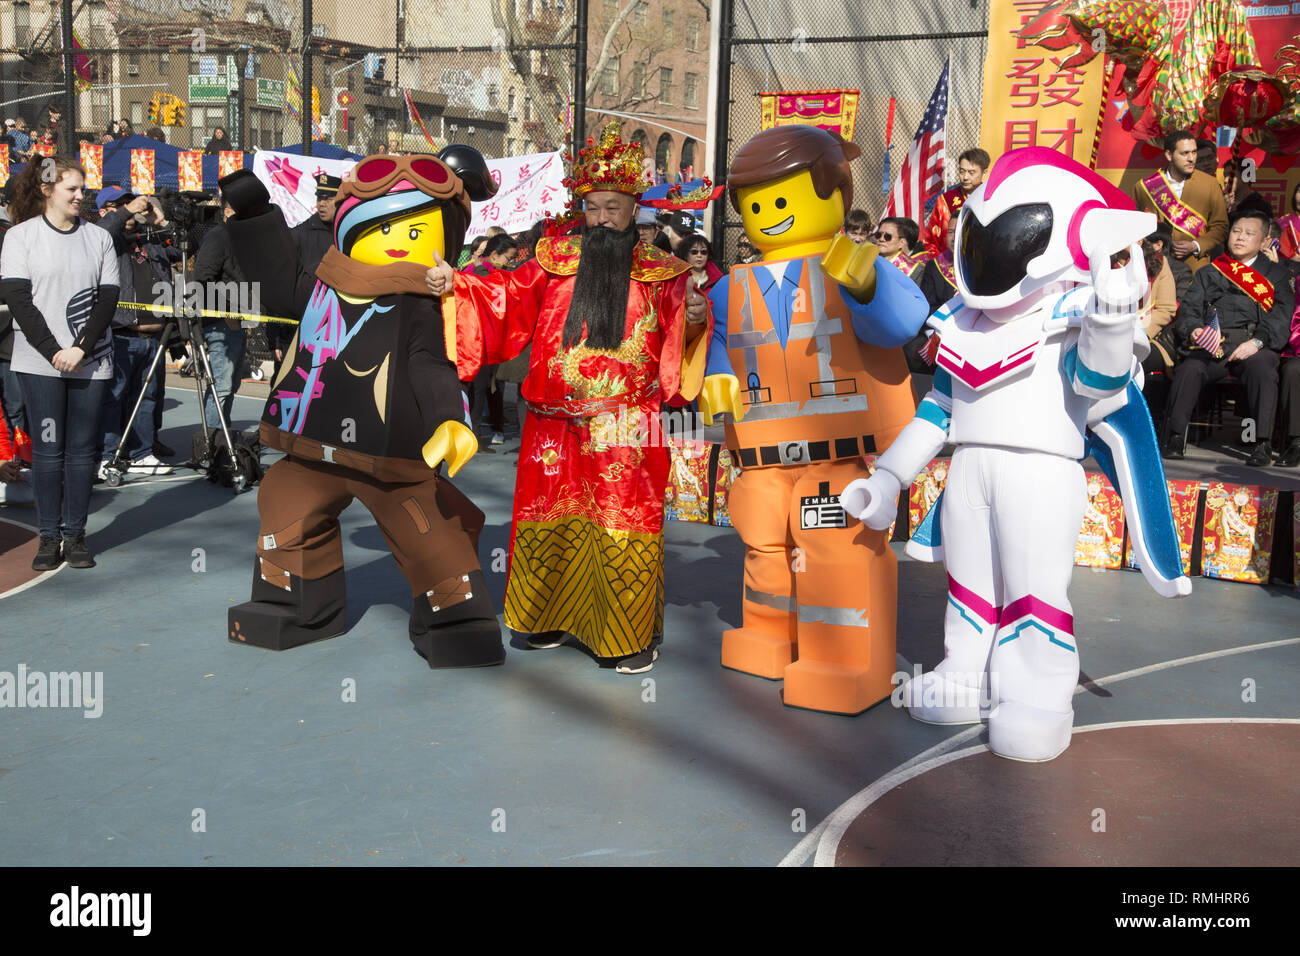 Characters from the film Lego 2, join in on the Lunar New Year festivities in Chinatown, New York City in 2019, the Year of the Pig. Stock Photo